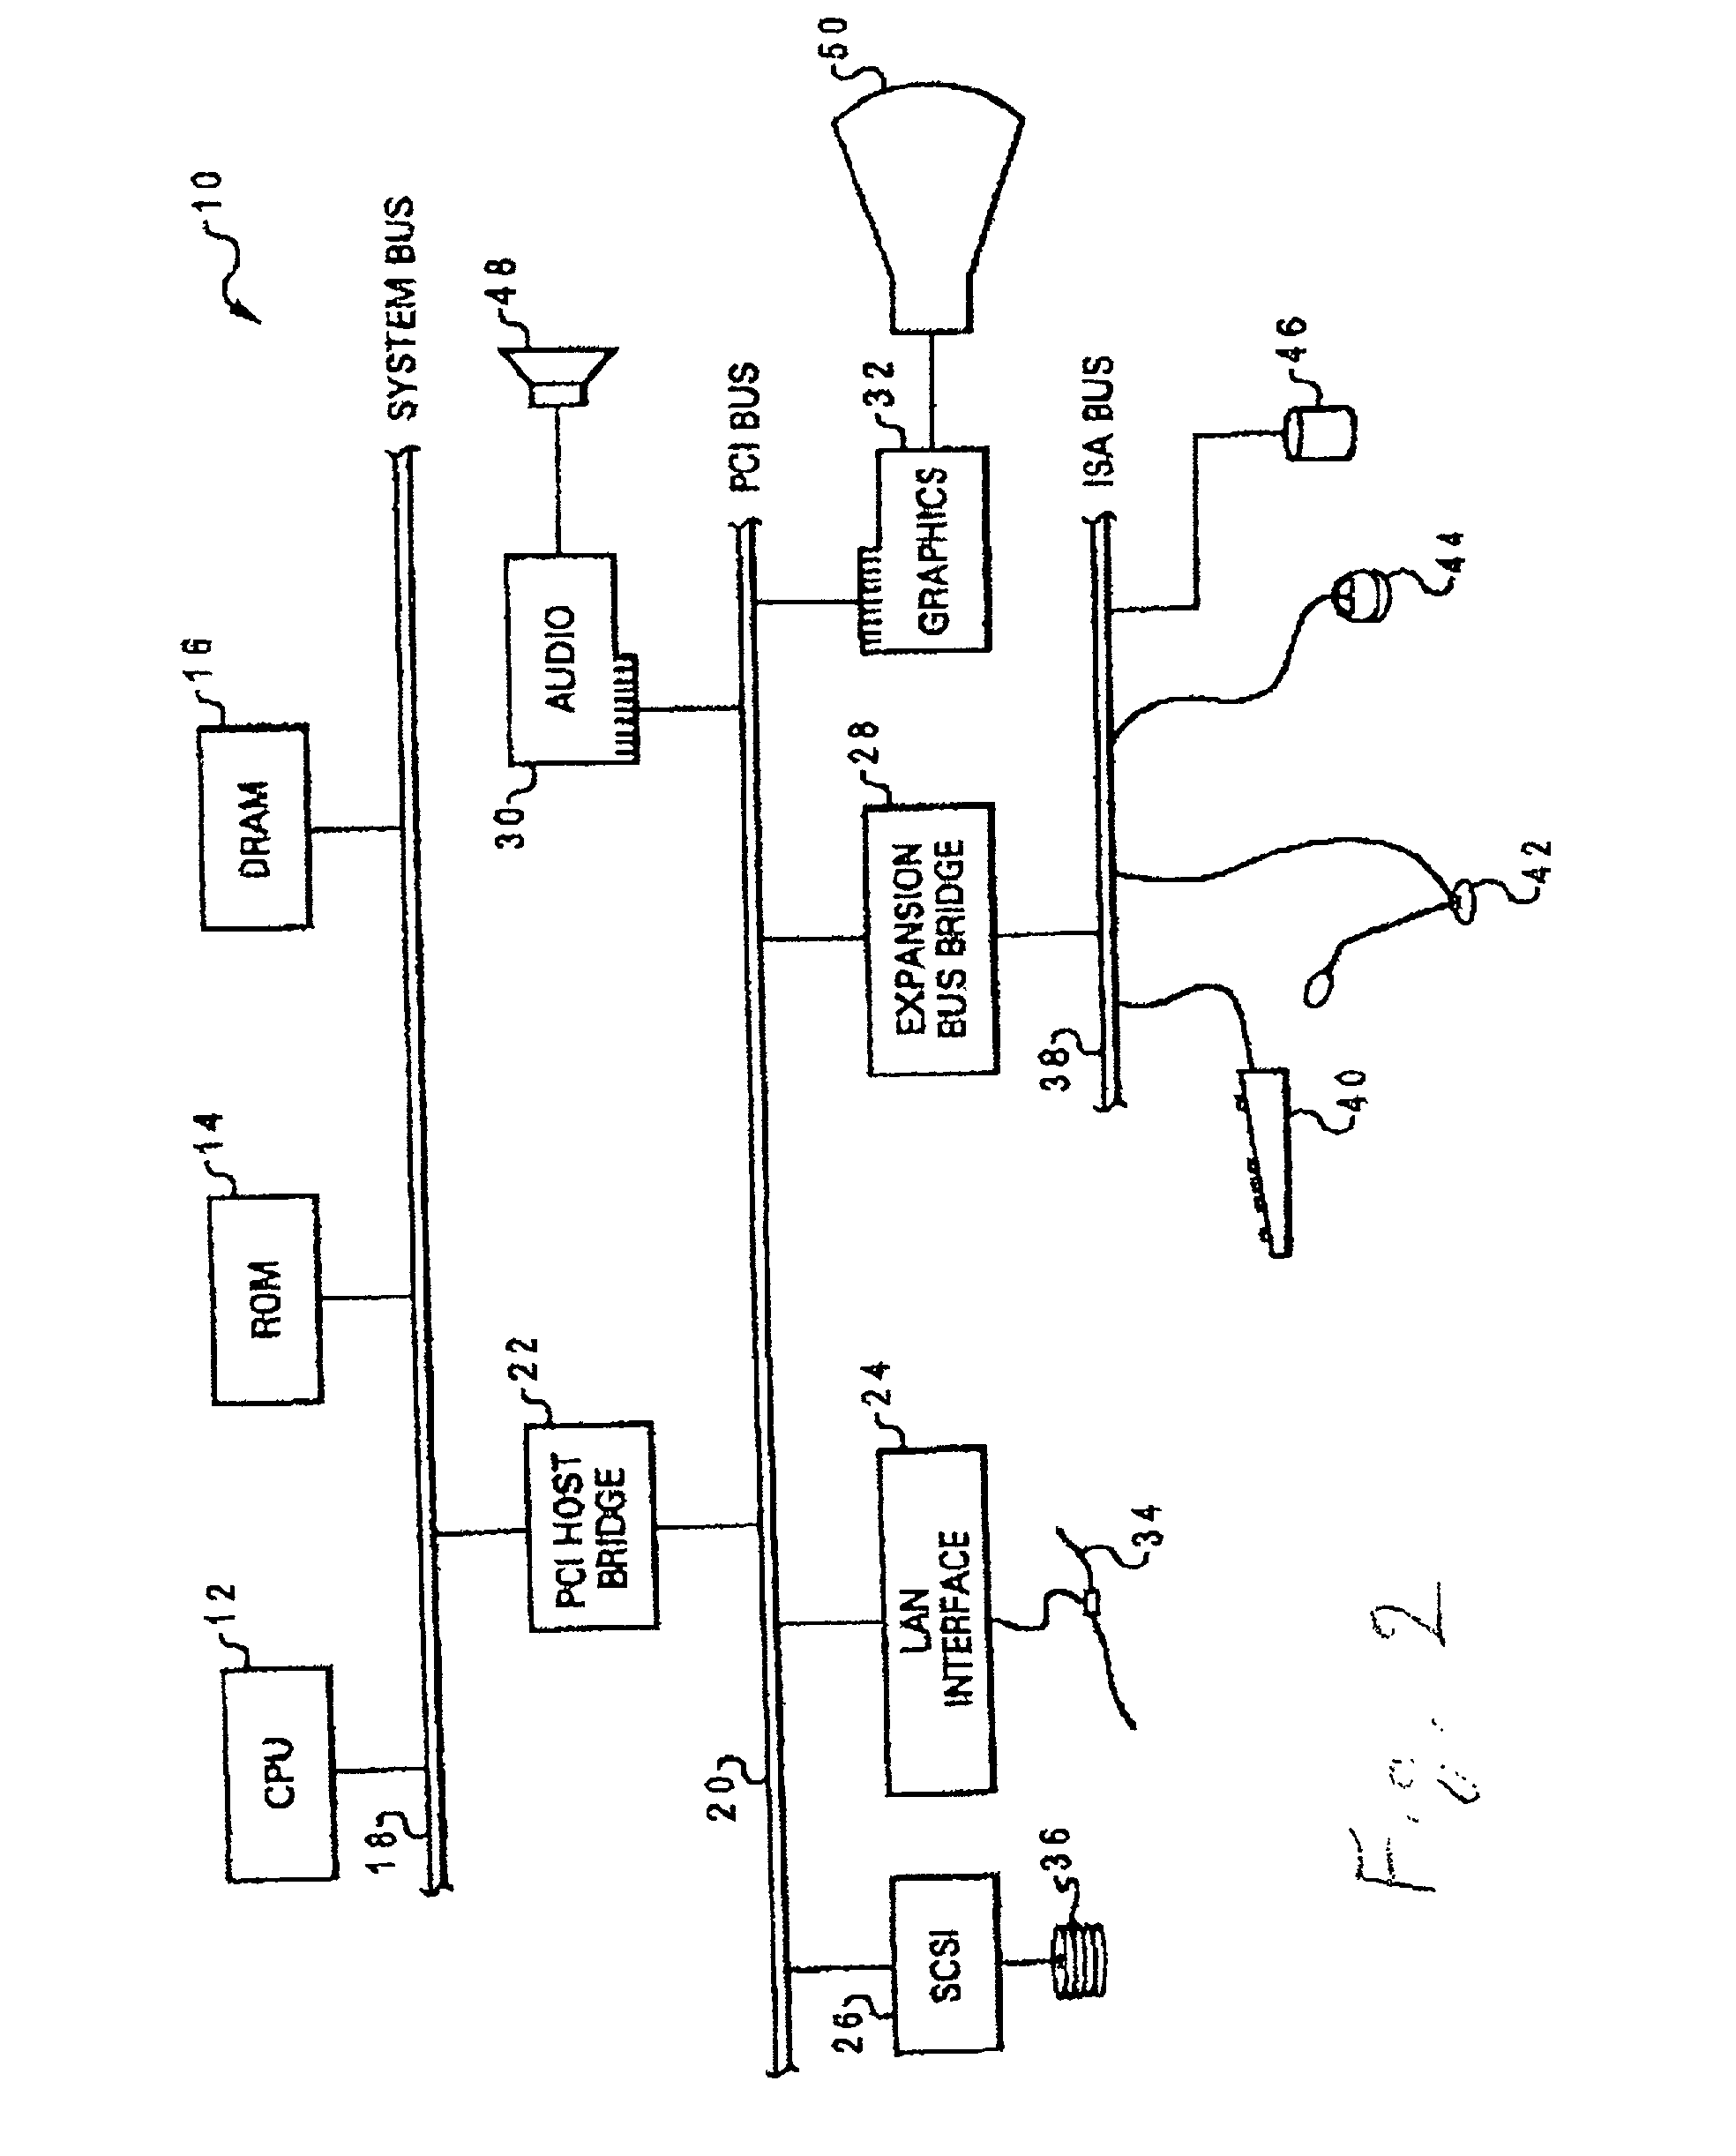 Analytical constraint generation for cut-based global placement